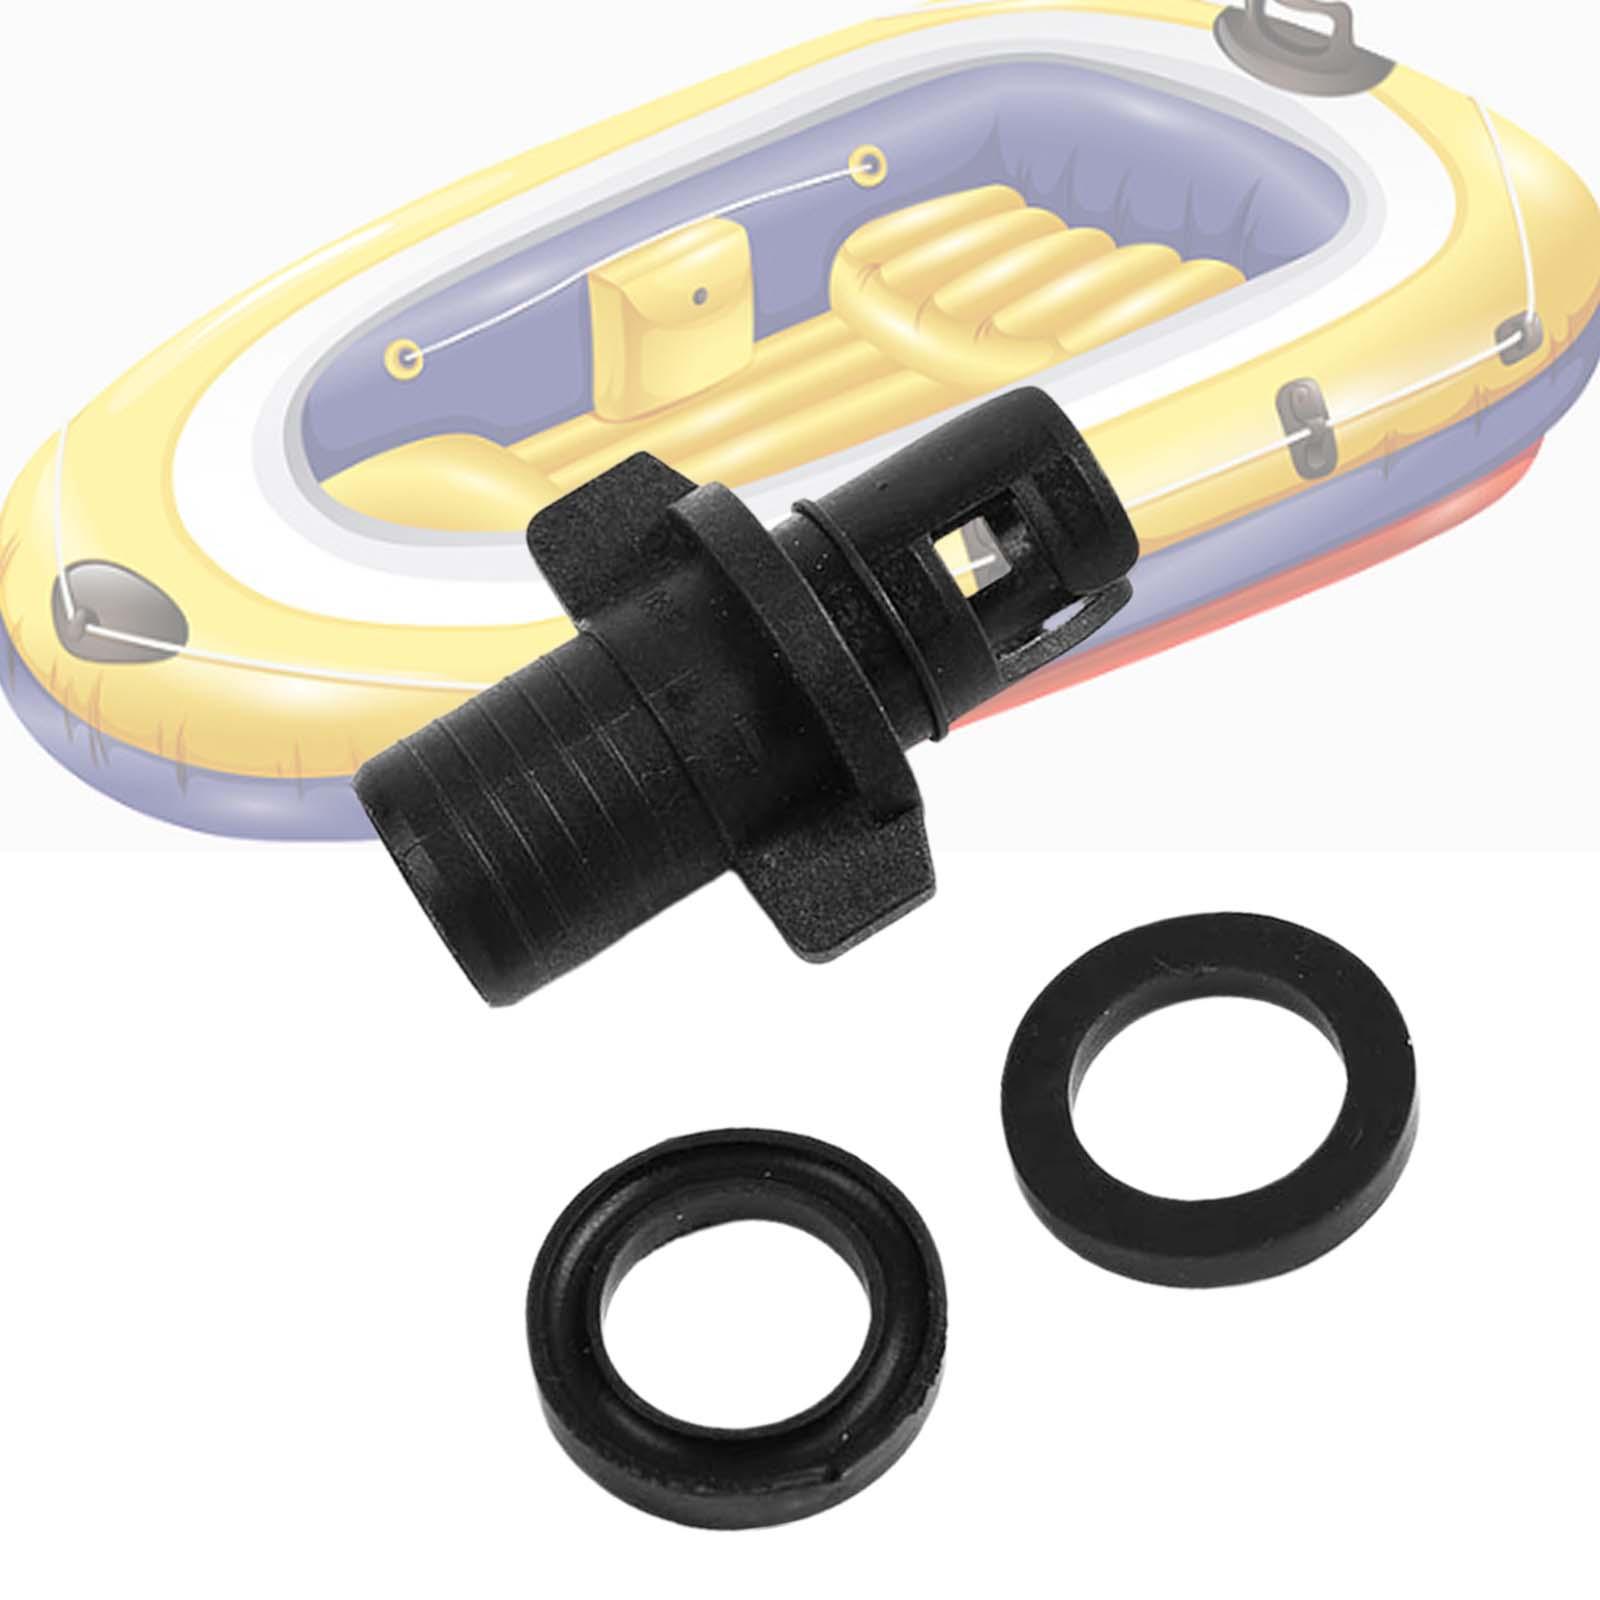 Air Valve Adapter Lightweight for Paddle Board Inflatable Bed